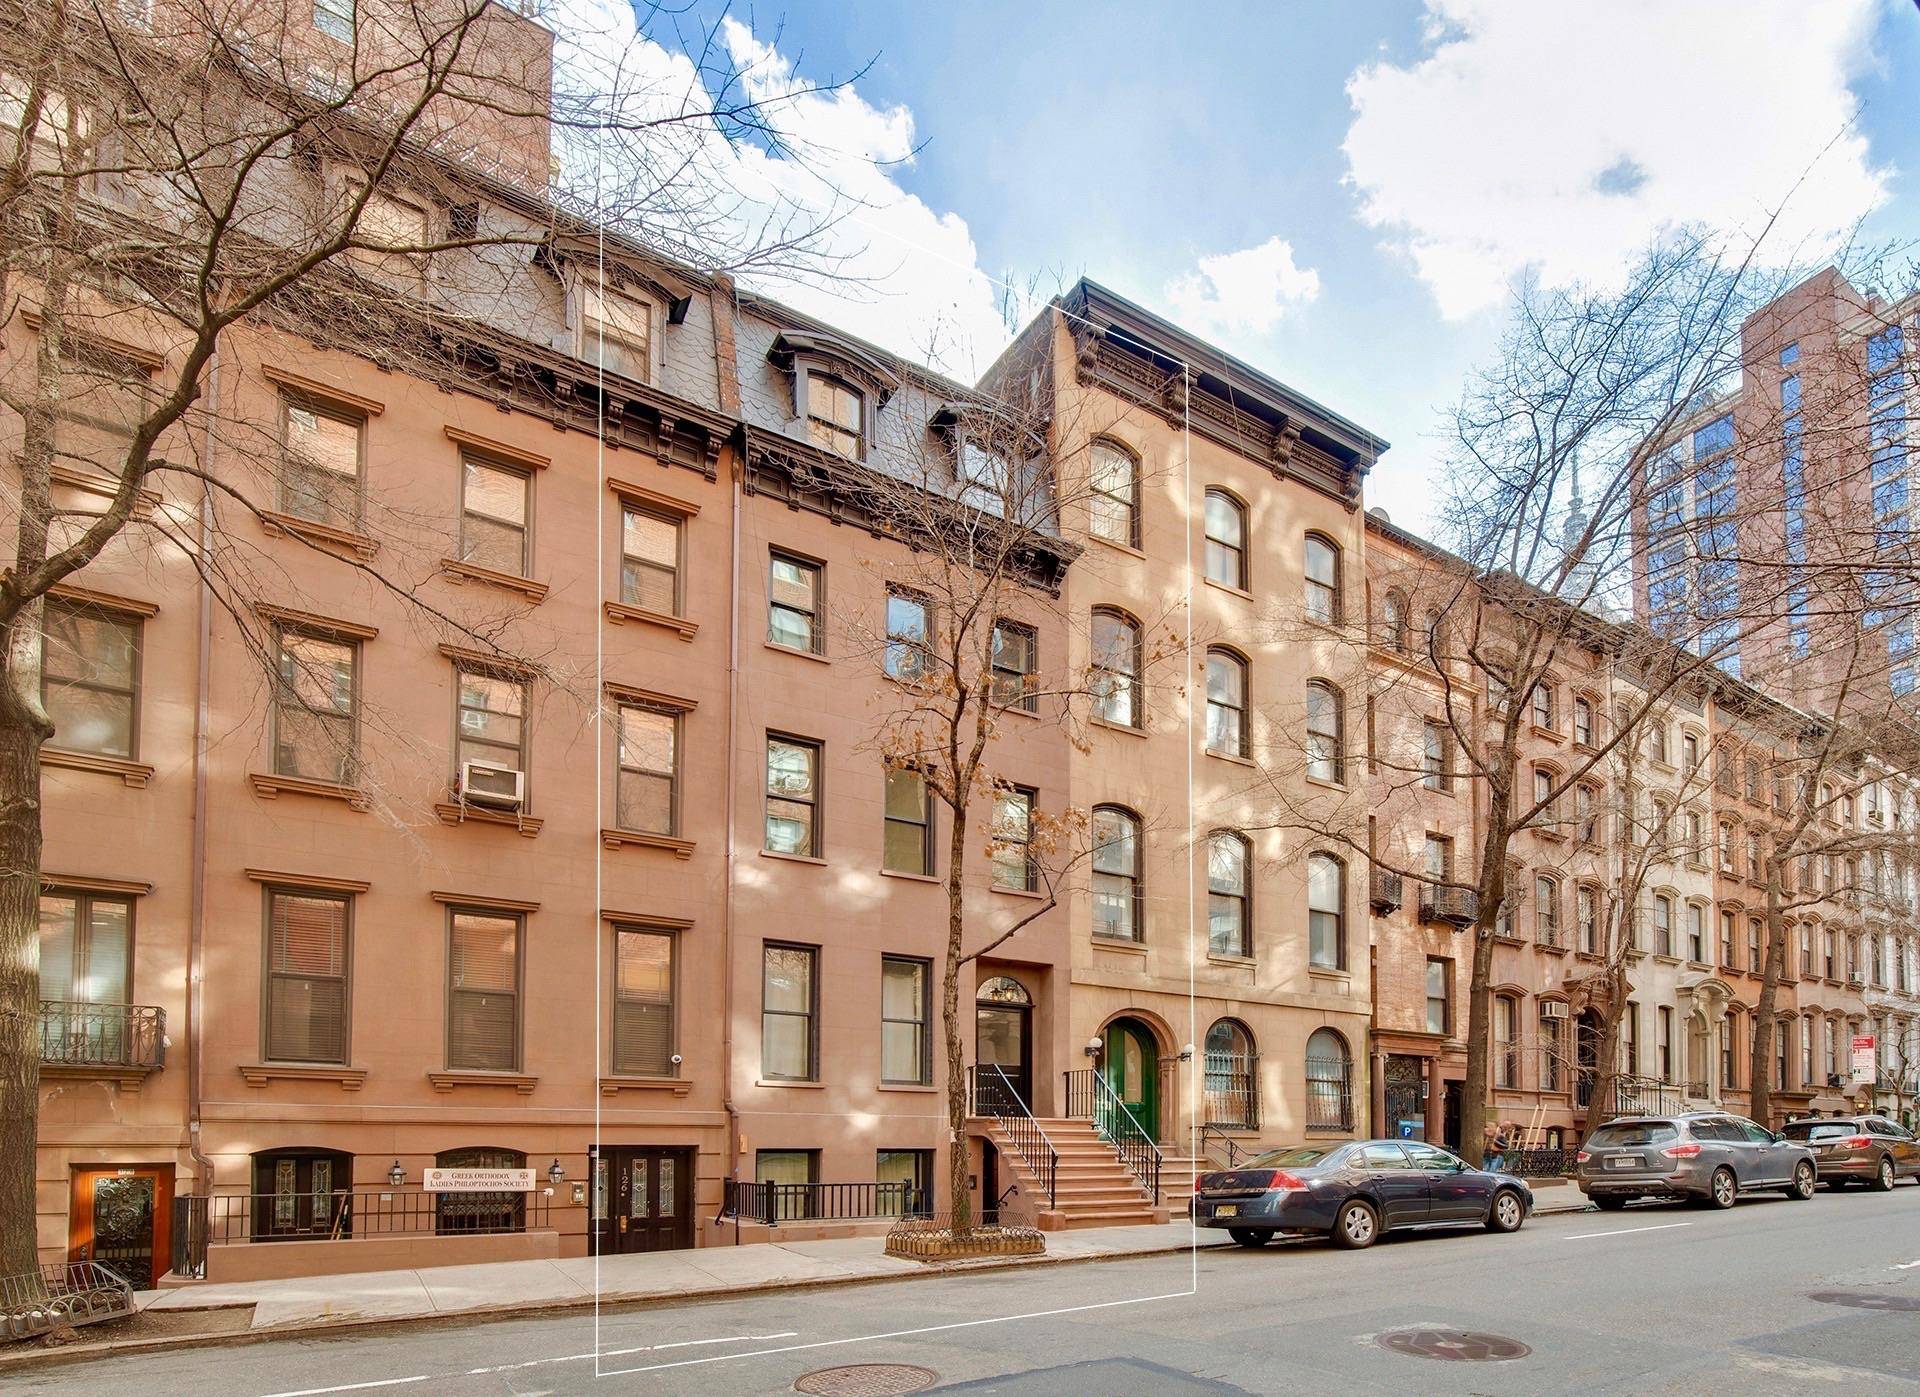 Unique opportunity to own a historic 5 story townhouse in Murray Hill between Park and Lexington Avenue.